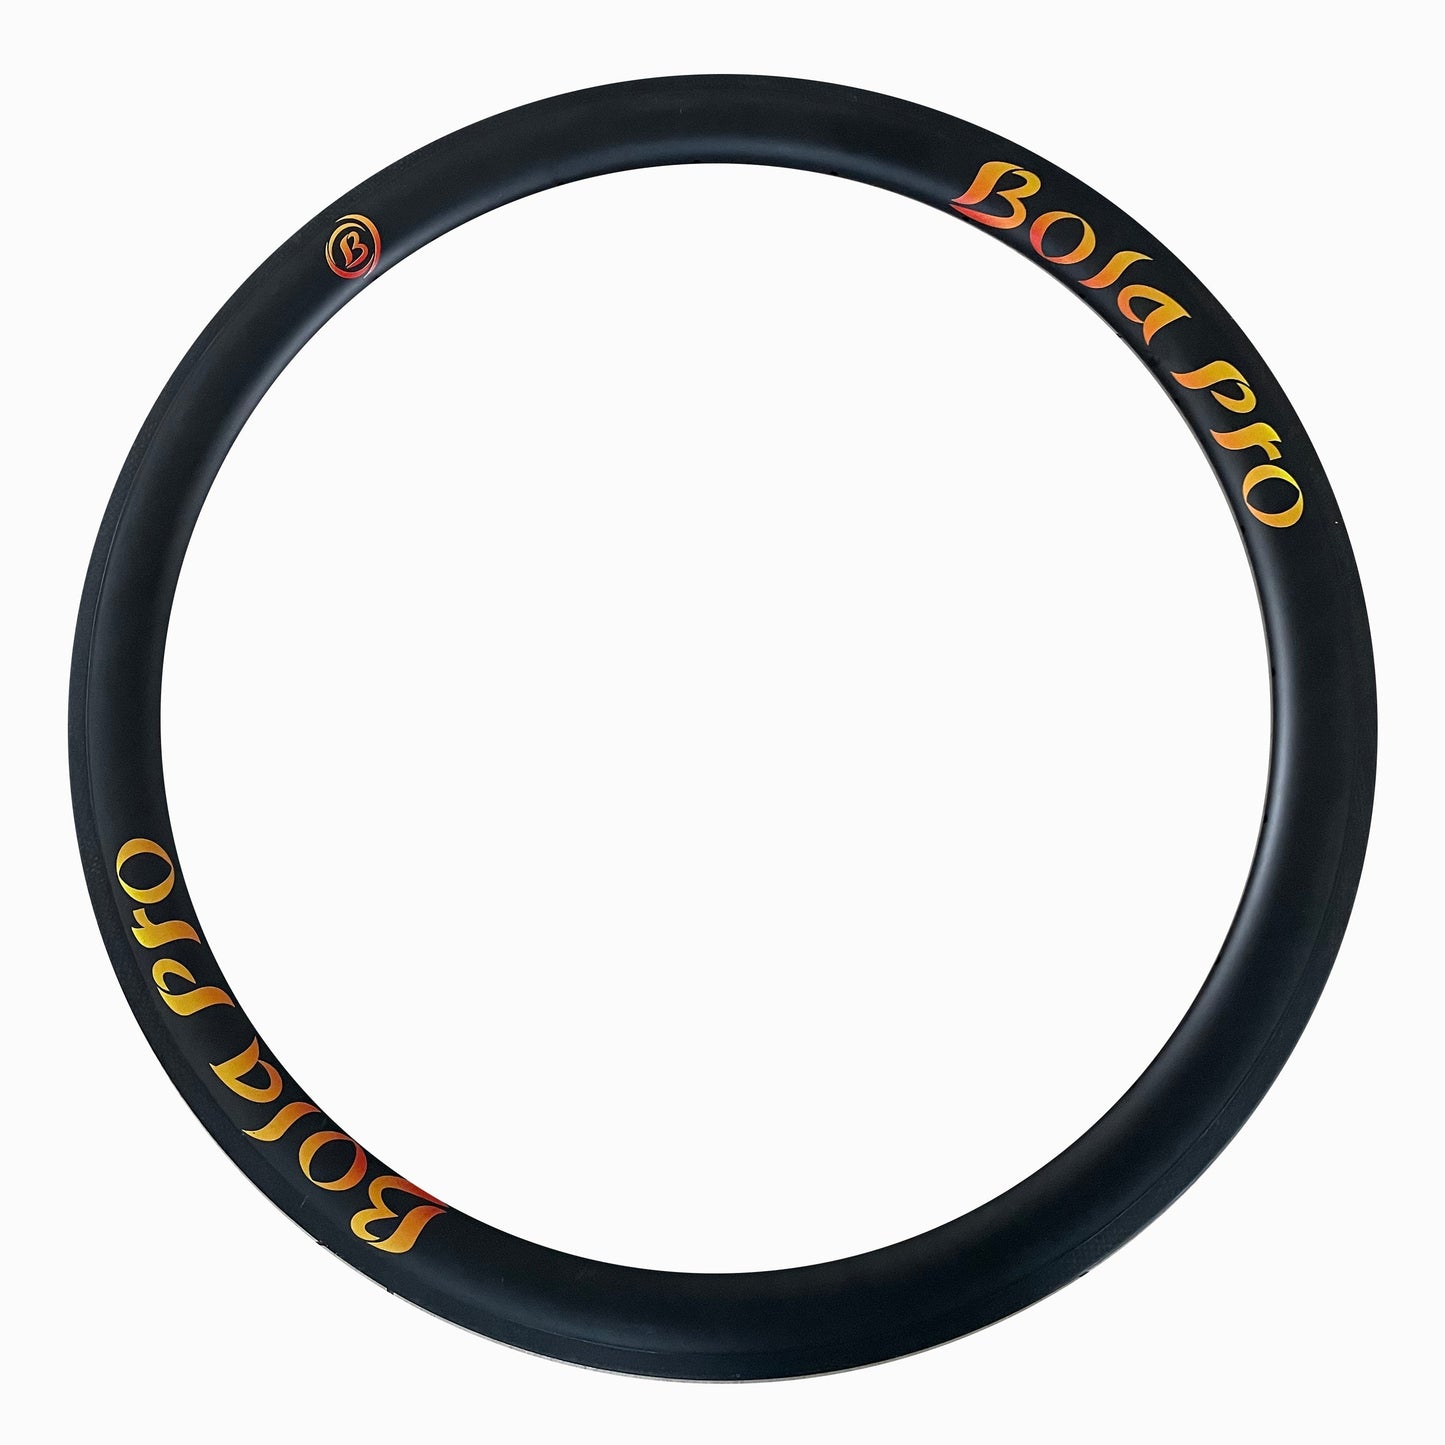 700c tubeless ready  carbon road race rim 50mm high  28mm outer wide 21mm inner wide for bike race